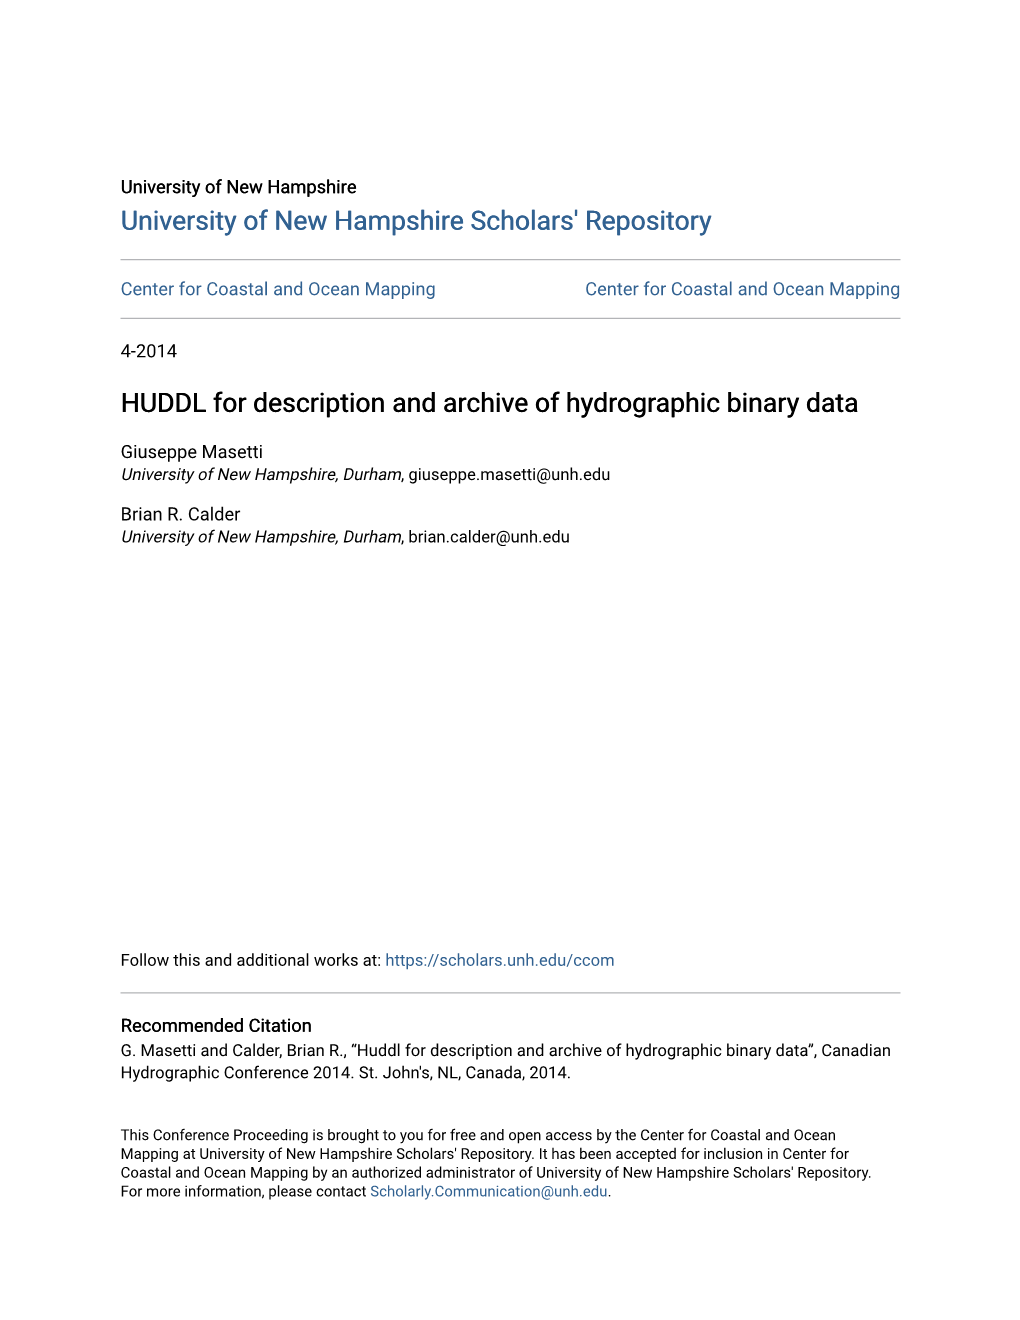 HUDDL for Description and Archive of Hydrographic Binary Data